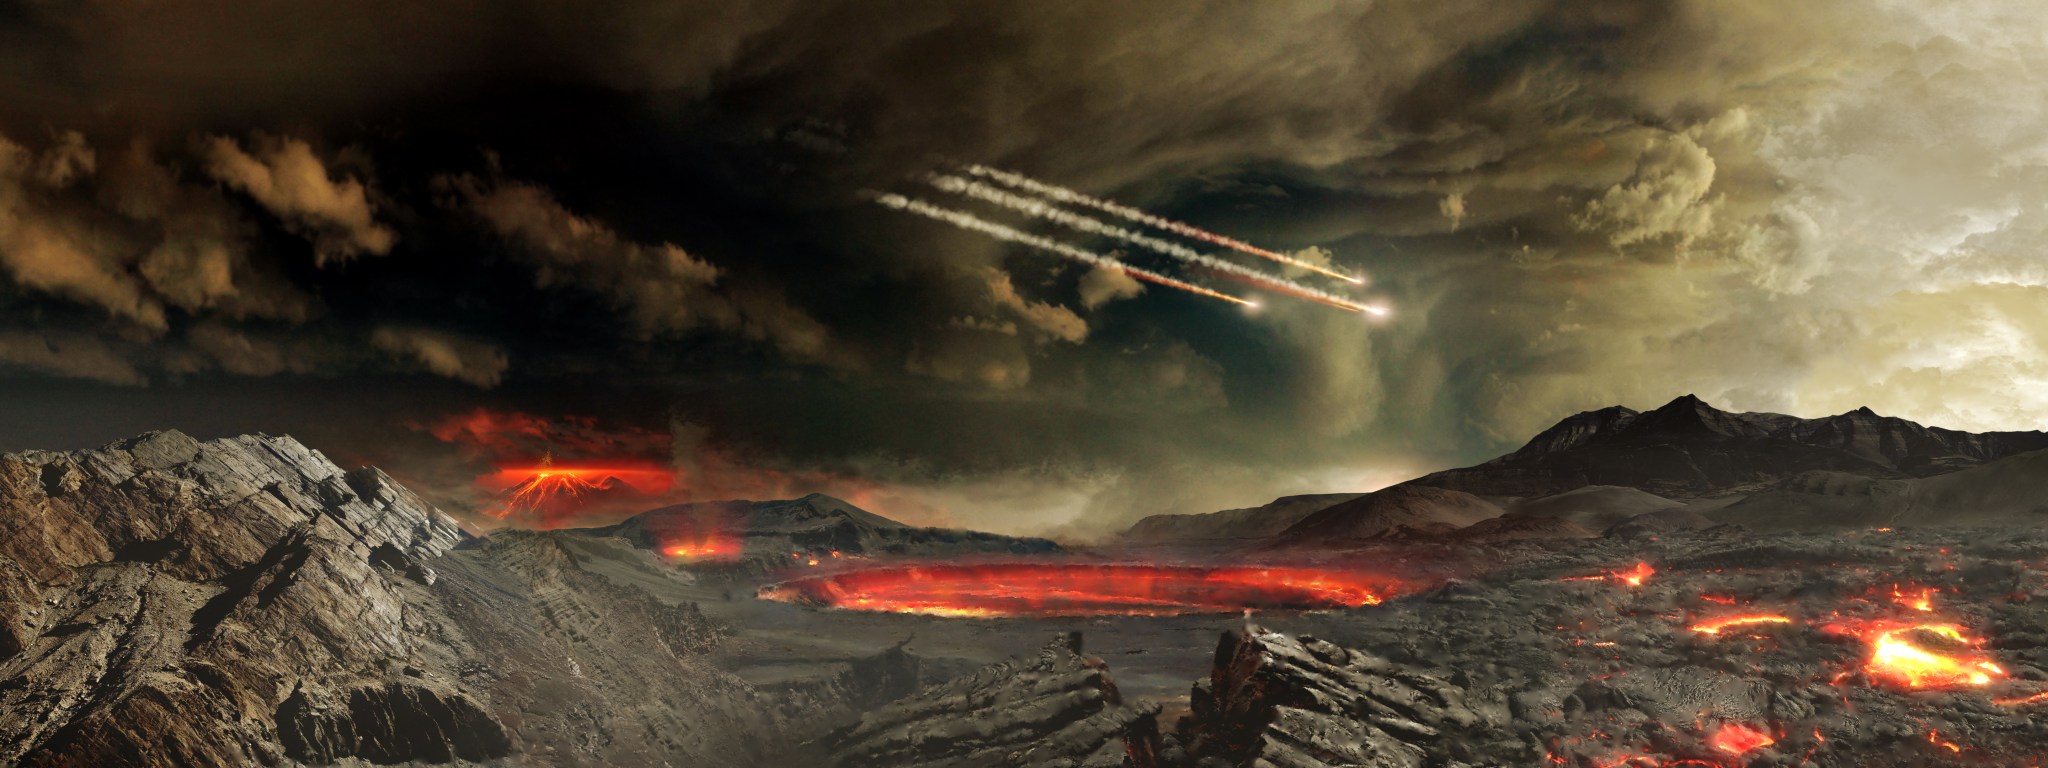 Artist's concept of meteors impacting ancient Earth